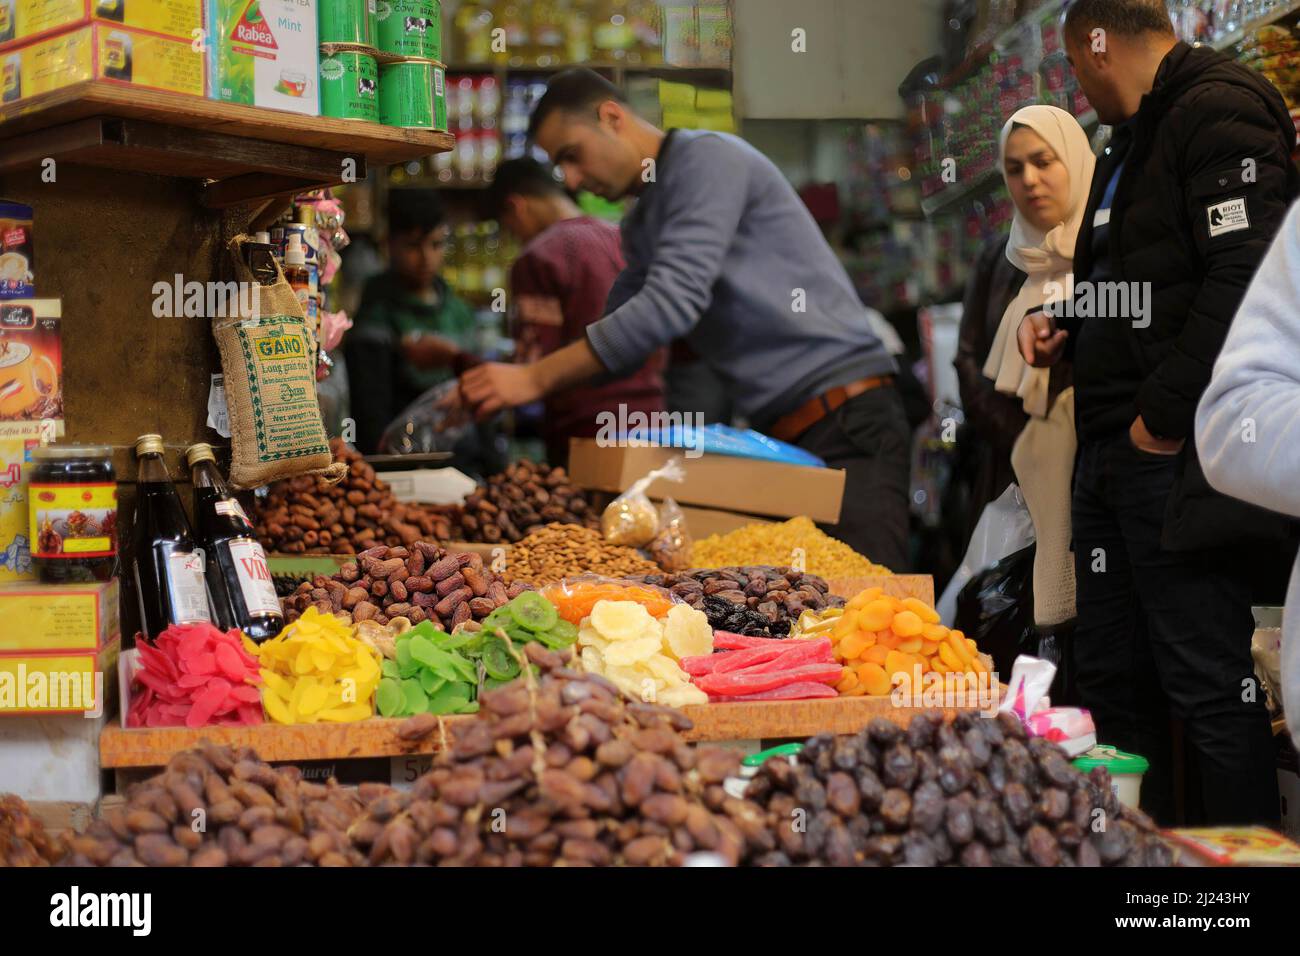 A Palestinian vendor sells dried fruit in his own shop in the oldest popular market called Al-Zawya in Gaza City. Palestinians prepare themselves ahead of the holy month of Ramadan by shopping in the oldest popular market called Al-Zawya middle of Gaza City, despite the high price of the goods in general caused by the Russian invasion of Ukraine. Muslims fast in Ramadan month, which is considered one of the pillars of Islam, in which Muslims abstain from eating and drinking until sunset. Stock Photo